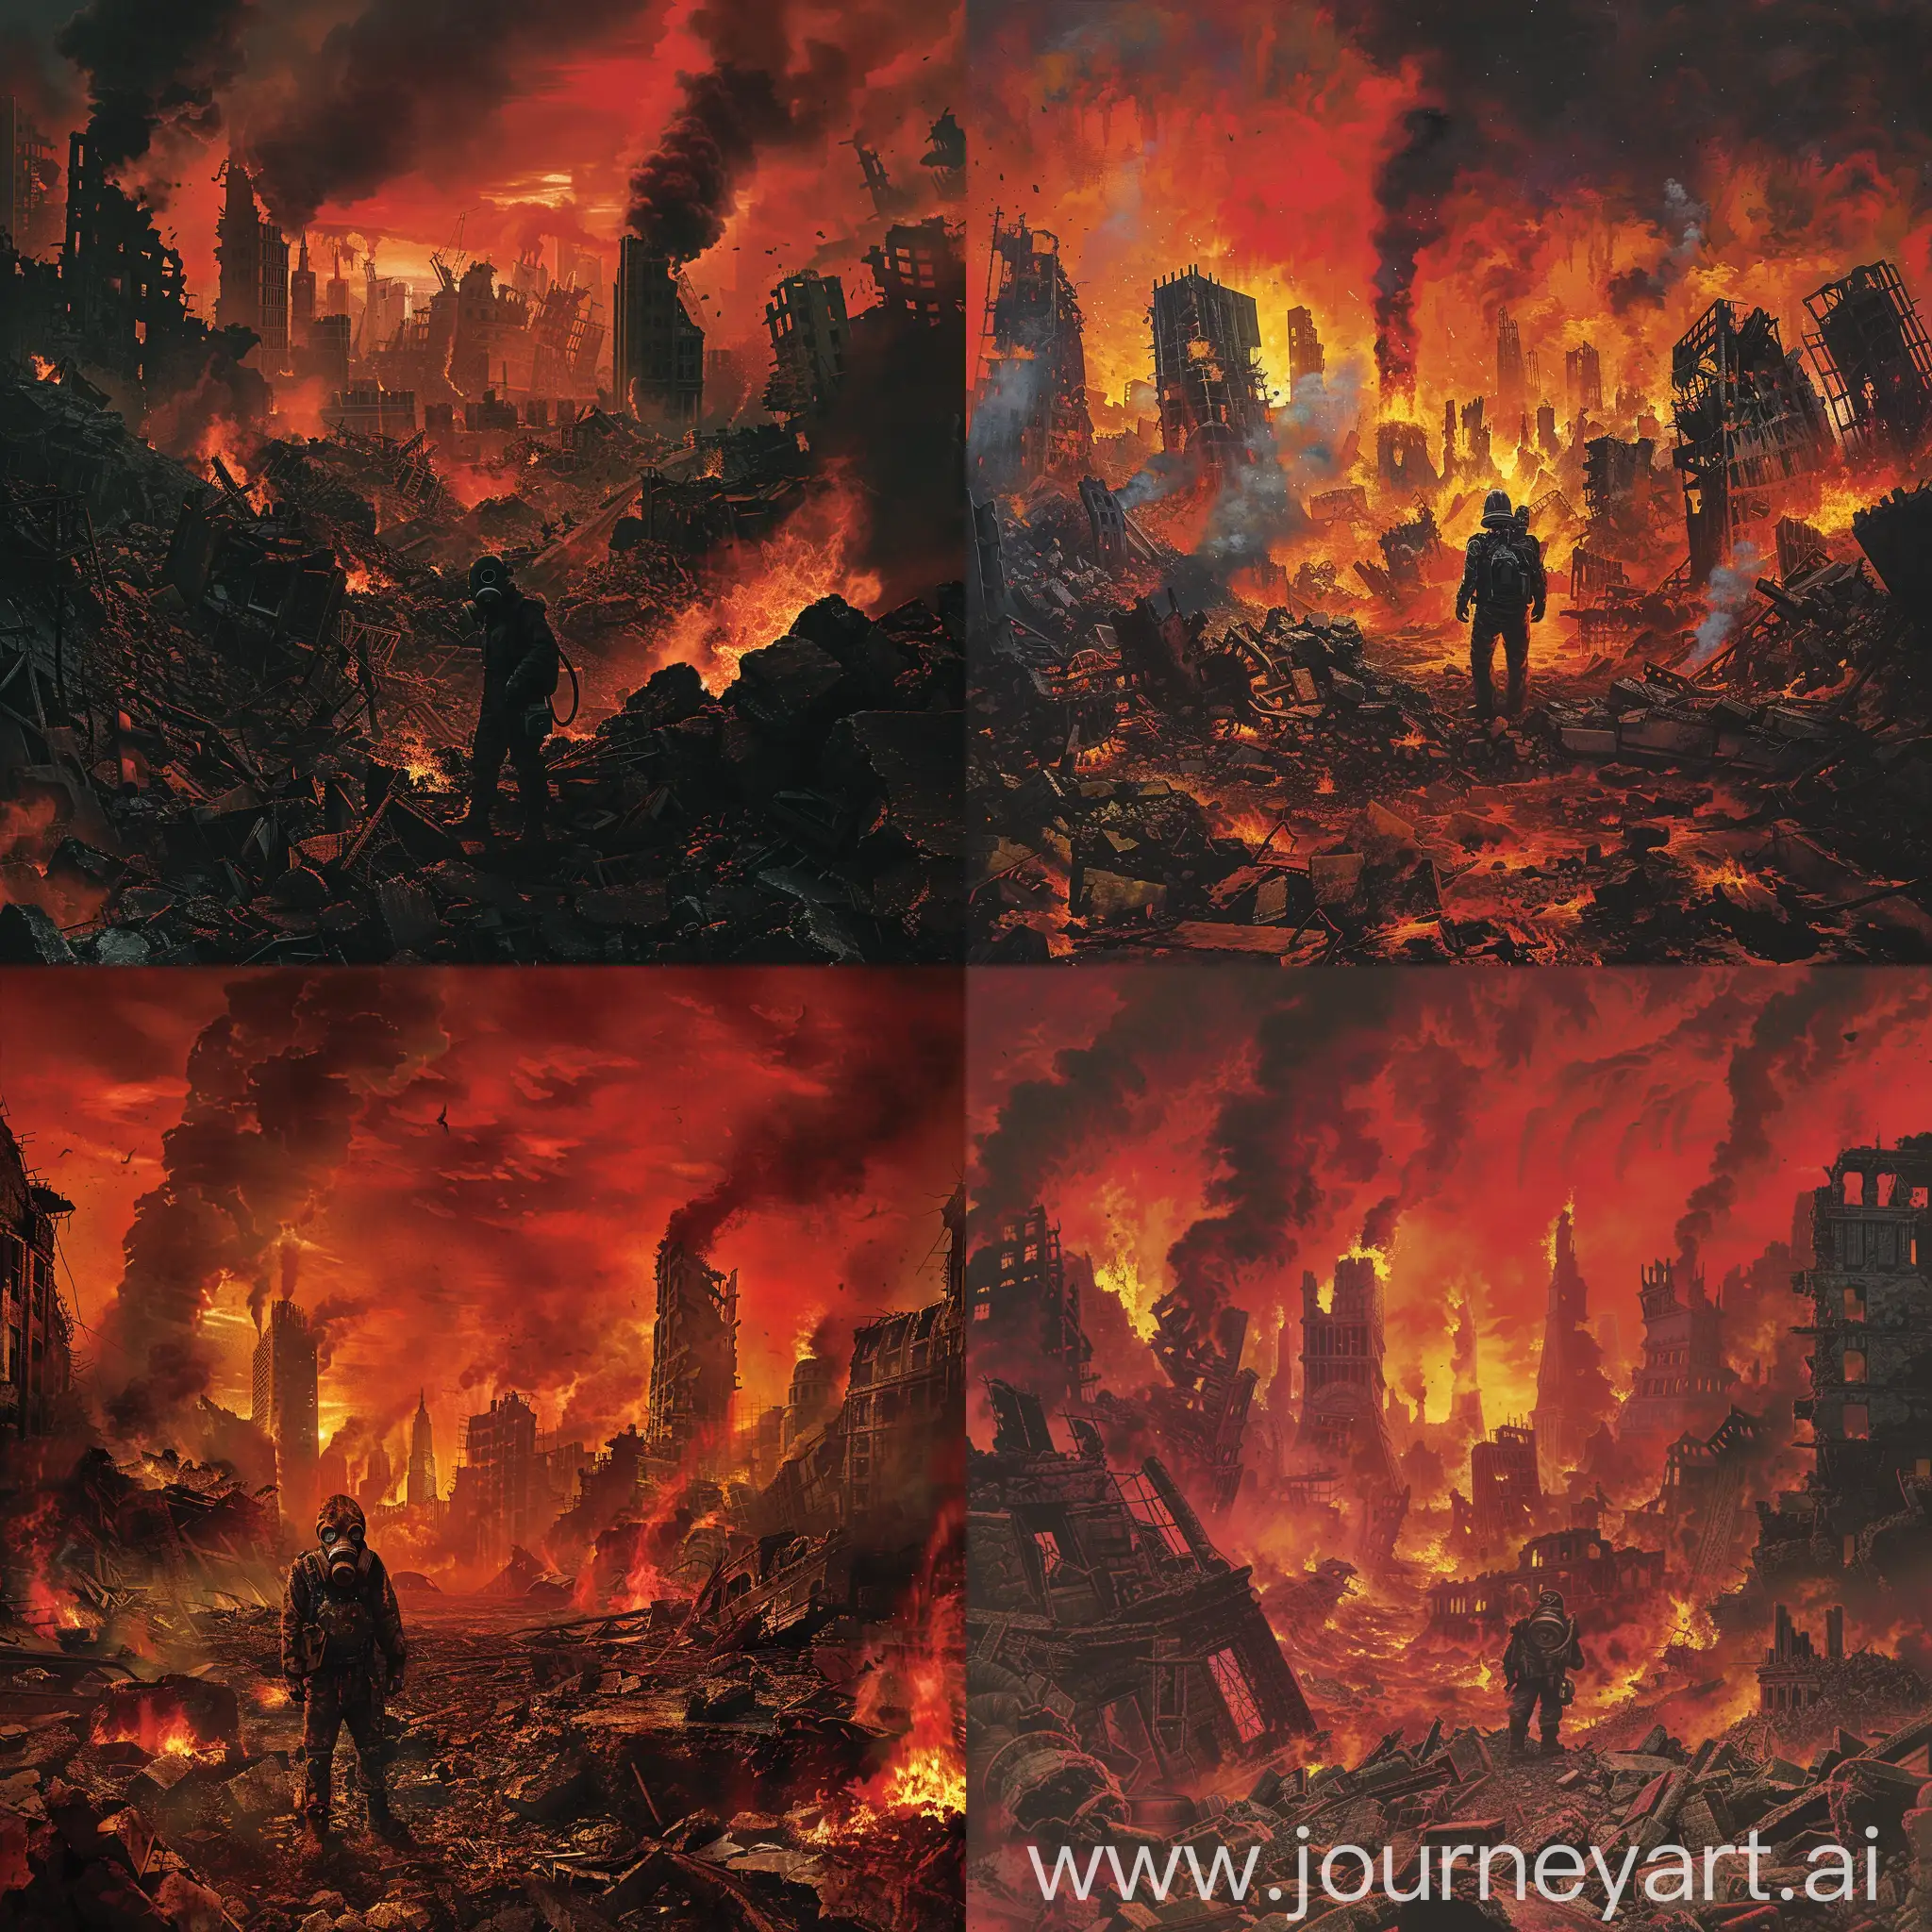 The cover features a post-apocalyptic cityscape in ruins, with flames and smoke rising in the background. The foreground shows a figure in a gas mask standing amid the wreckage, with a blood-red sky above.